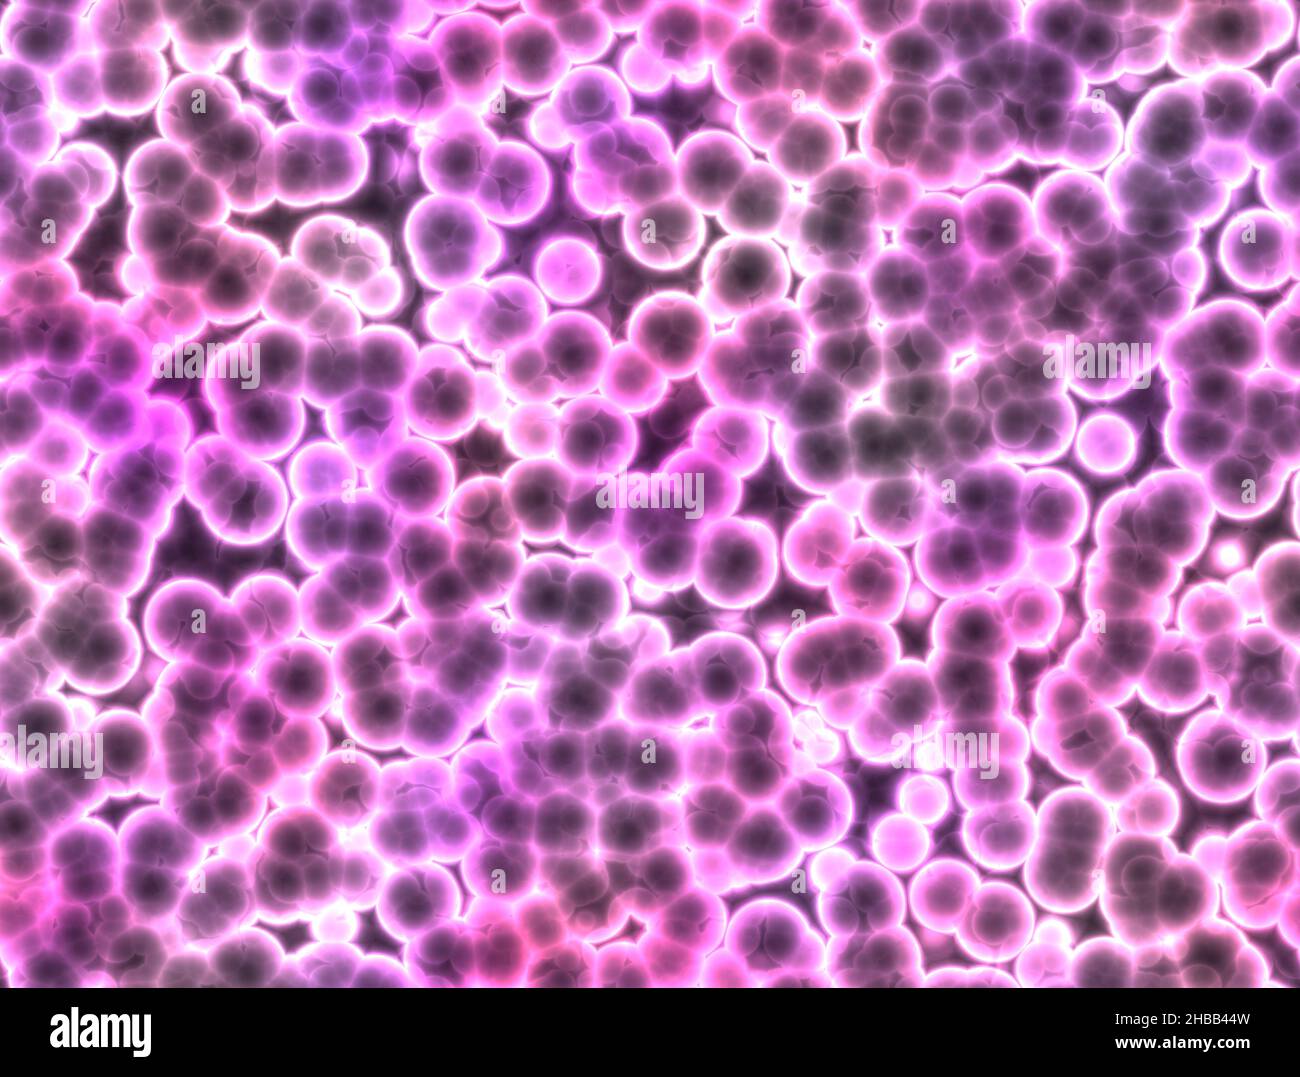 Cells, micro organisms, life formation. Cell duplication. Formation of batteries and microorganisms seen under a microscope. Bacteria texture Stock Photo